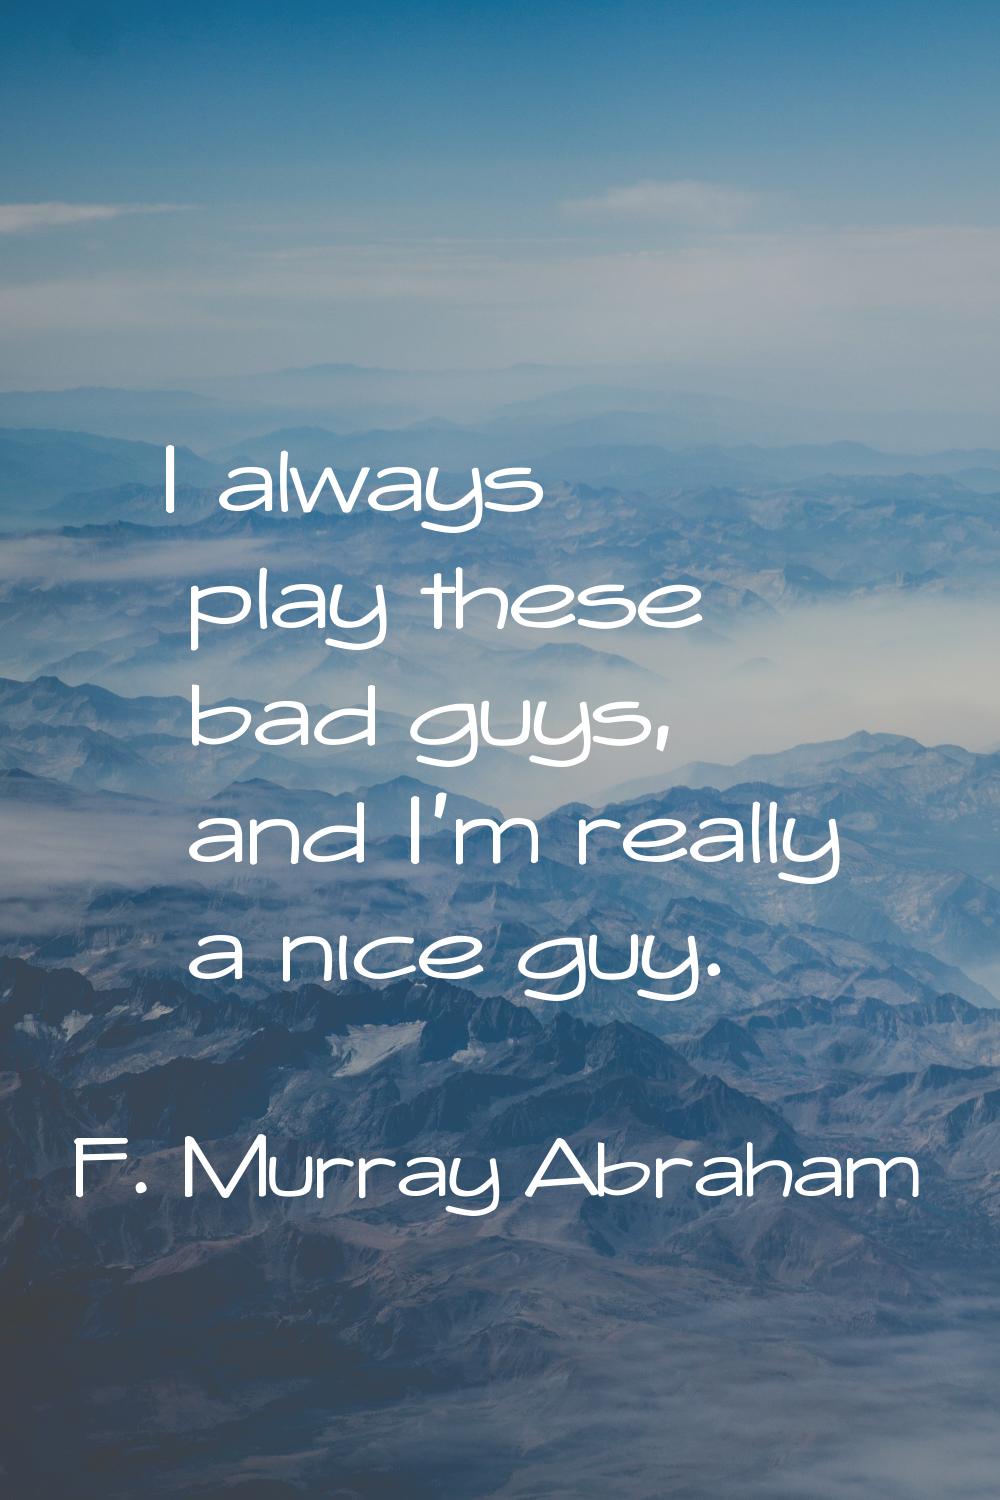 I always play these bad guys, and I'm really a nice guy.